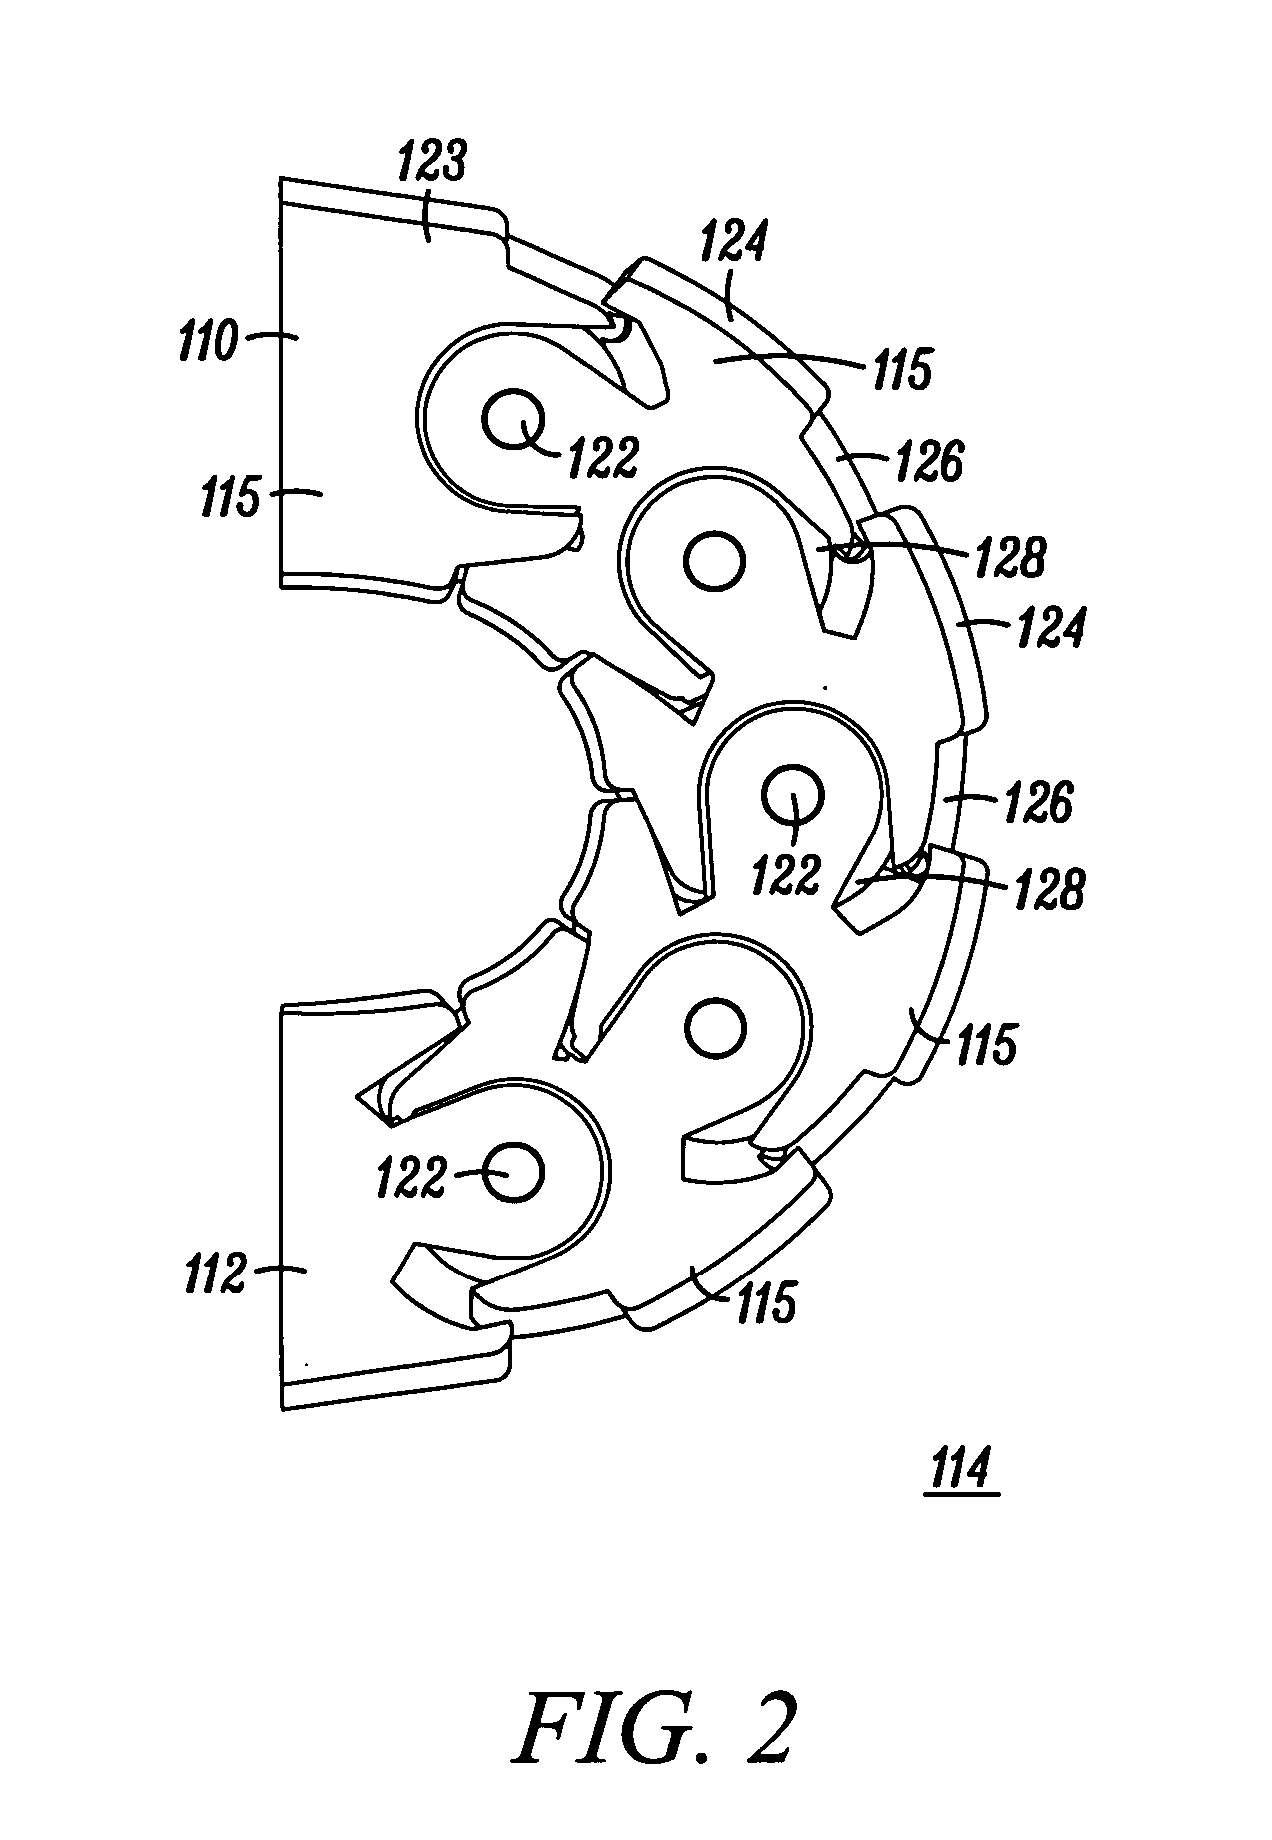 Flexible hinge for portable electronic device